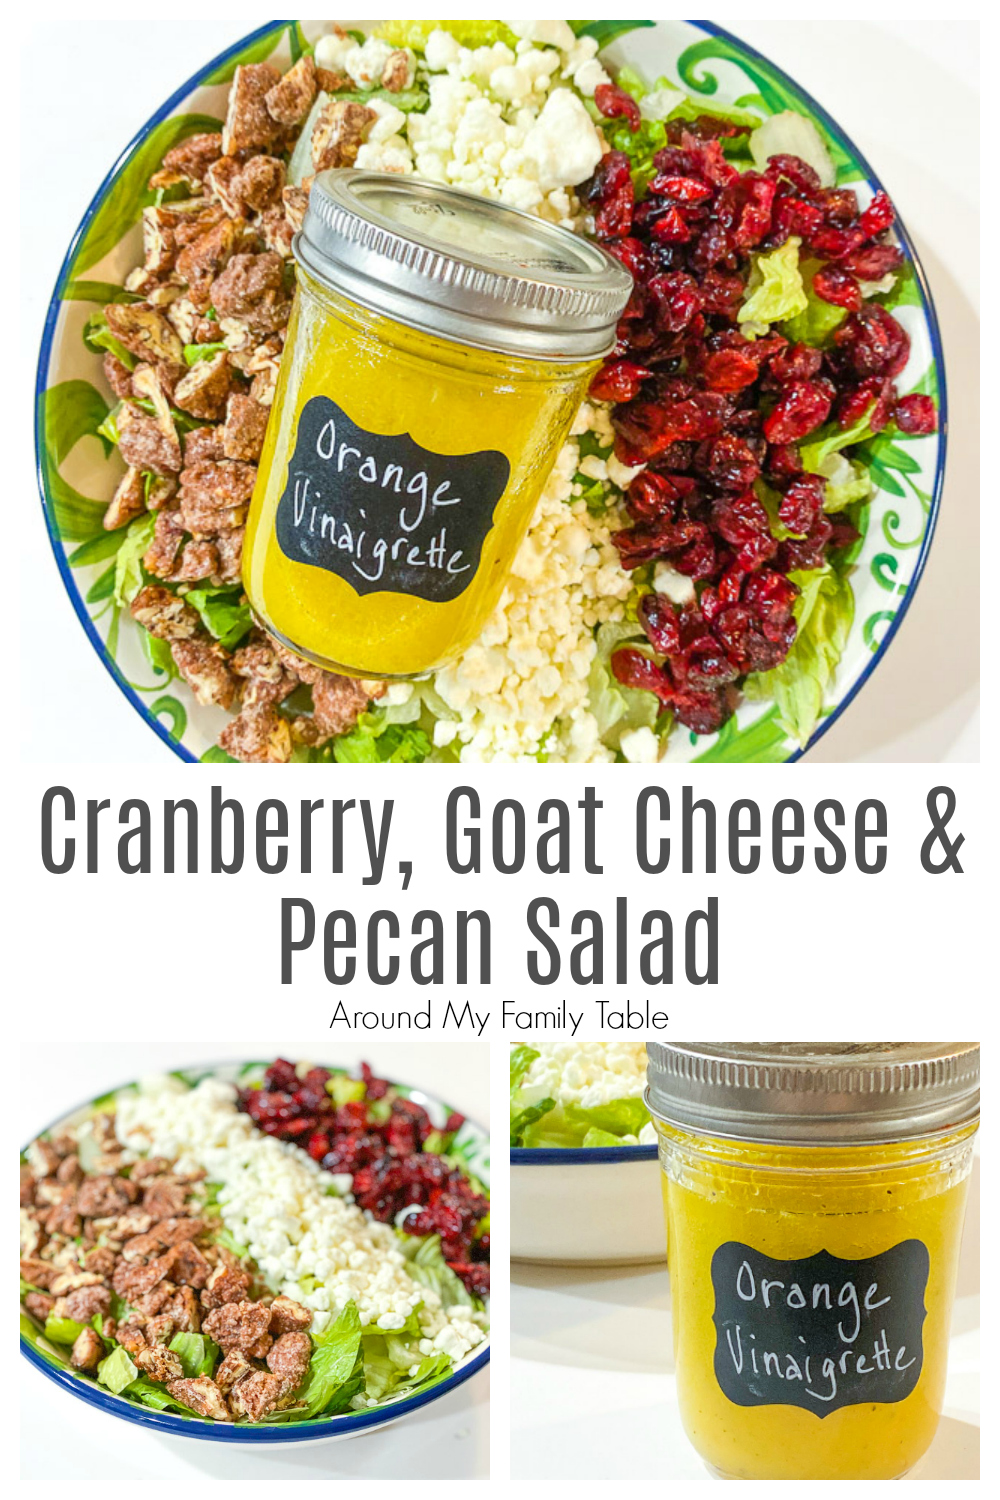 Serve this easy Cranberry, Goat Cheese, & Pecan Salad with Orange Vinaigrette with supper tonight. There are so many delicious add ins to this salad that everyone loves it! via @slingmama